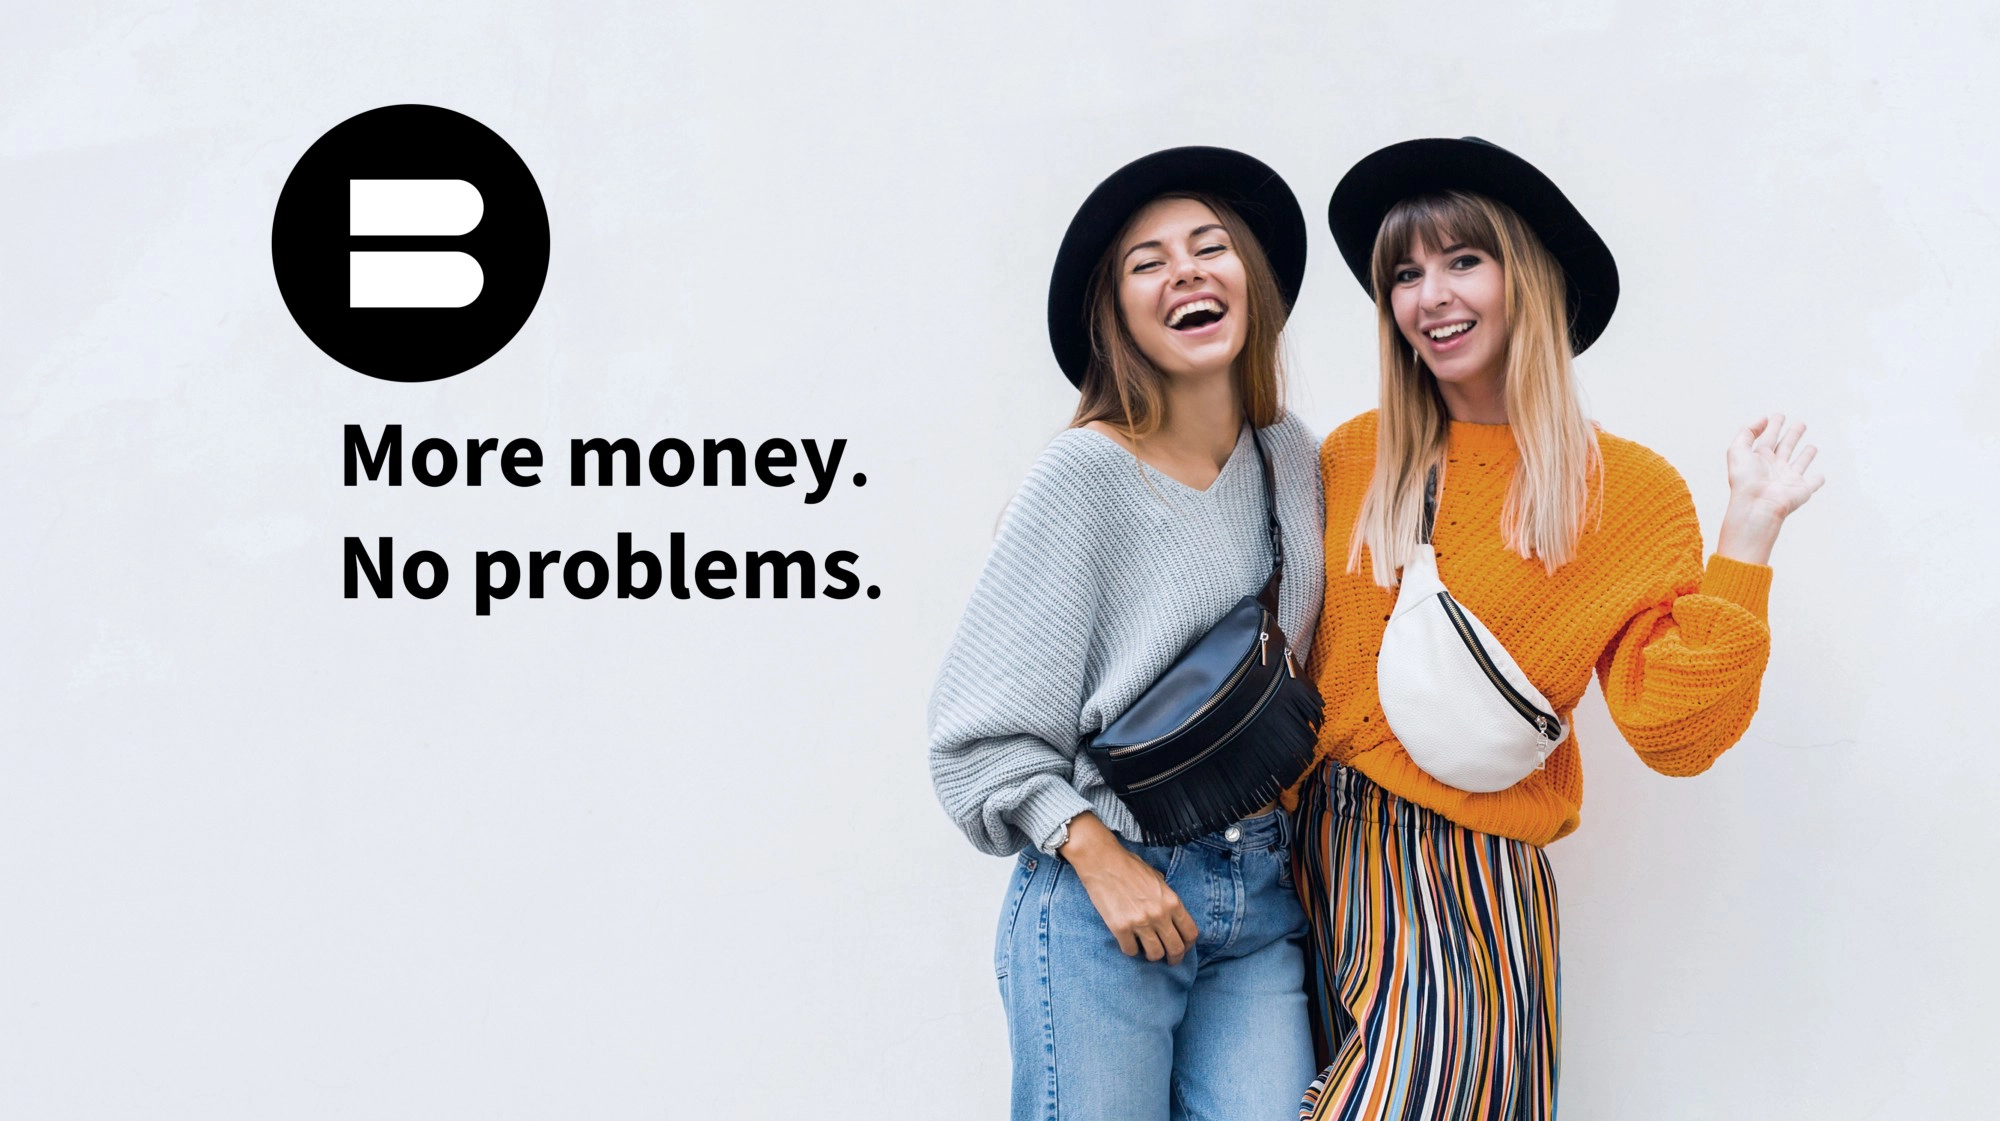 How B-Social is improving people’s relationship with money, for good